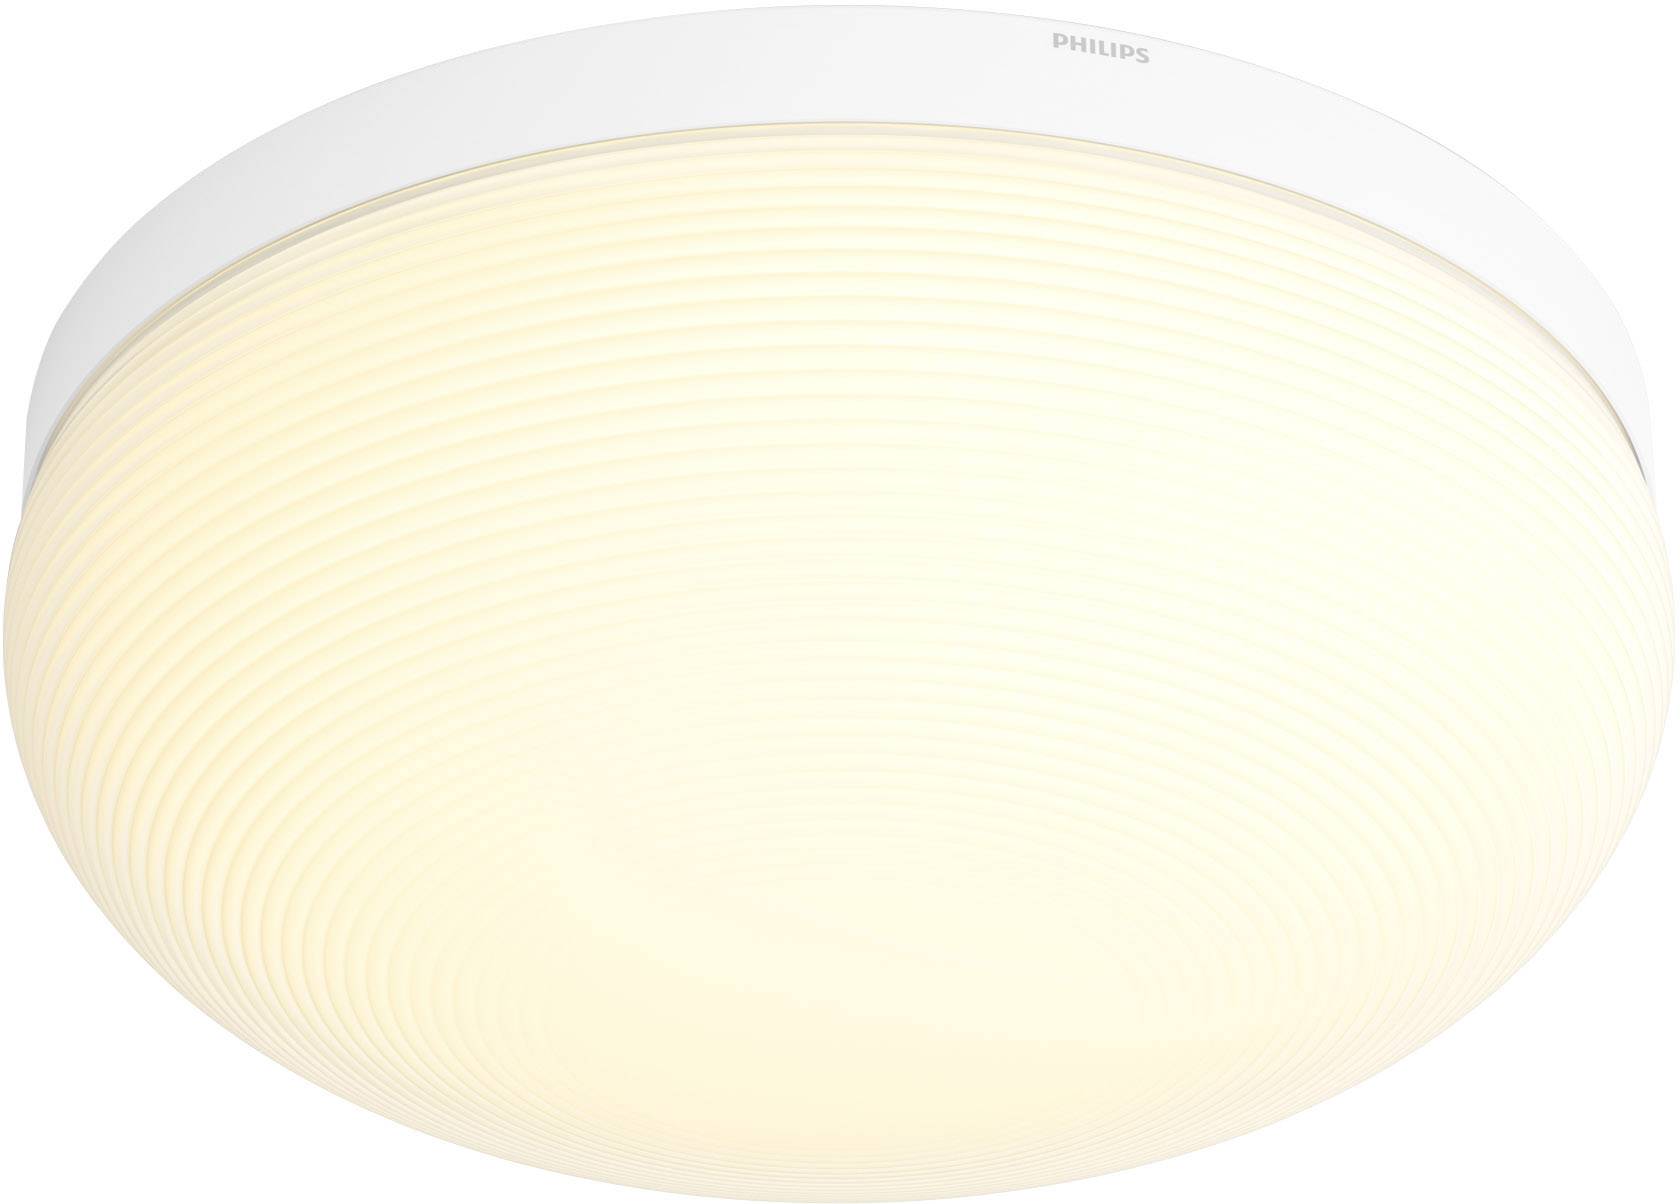 Philips Lighting Hue Led Wall And Ceiling Light Flourish Built In